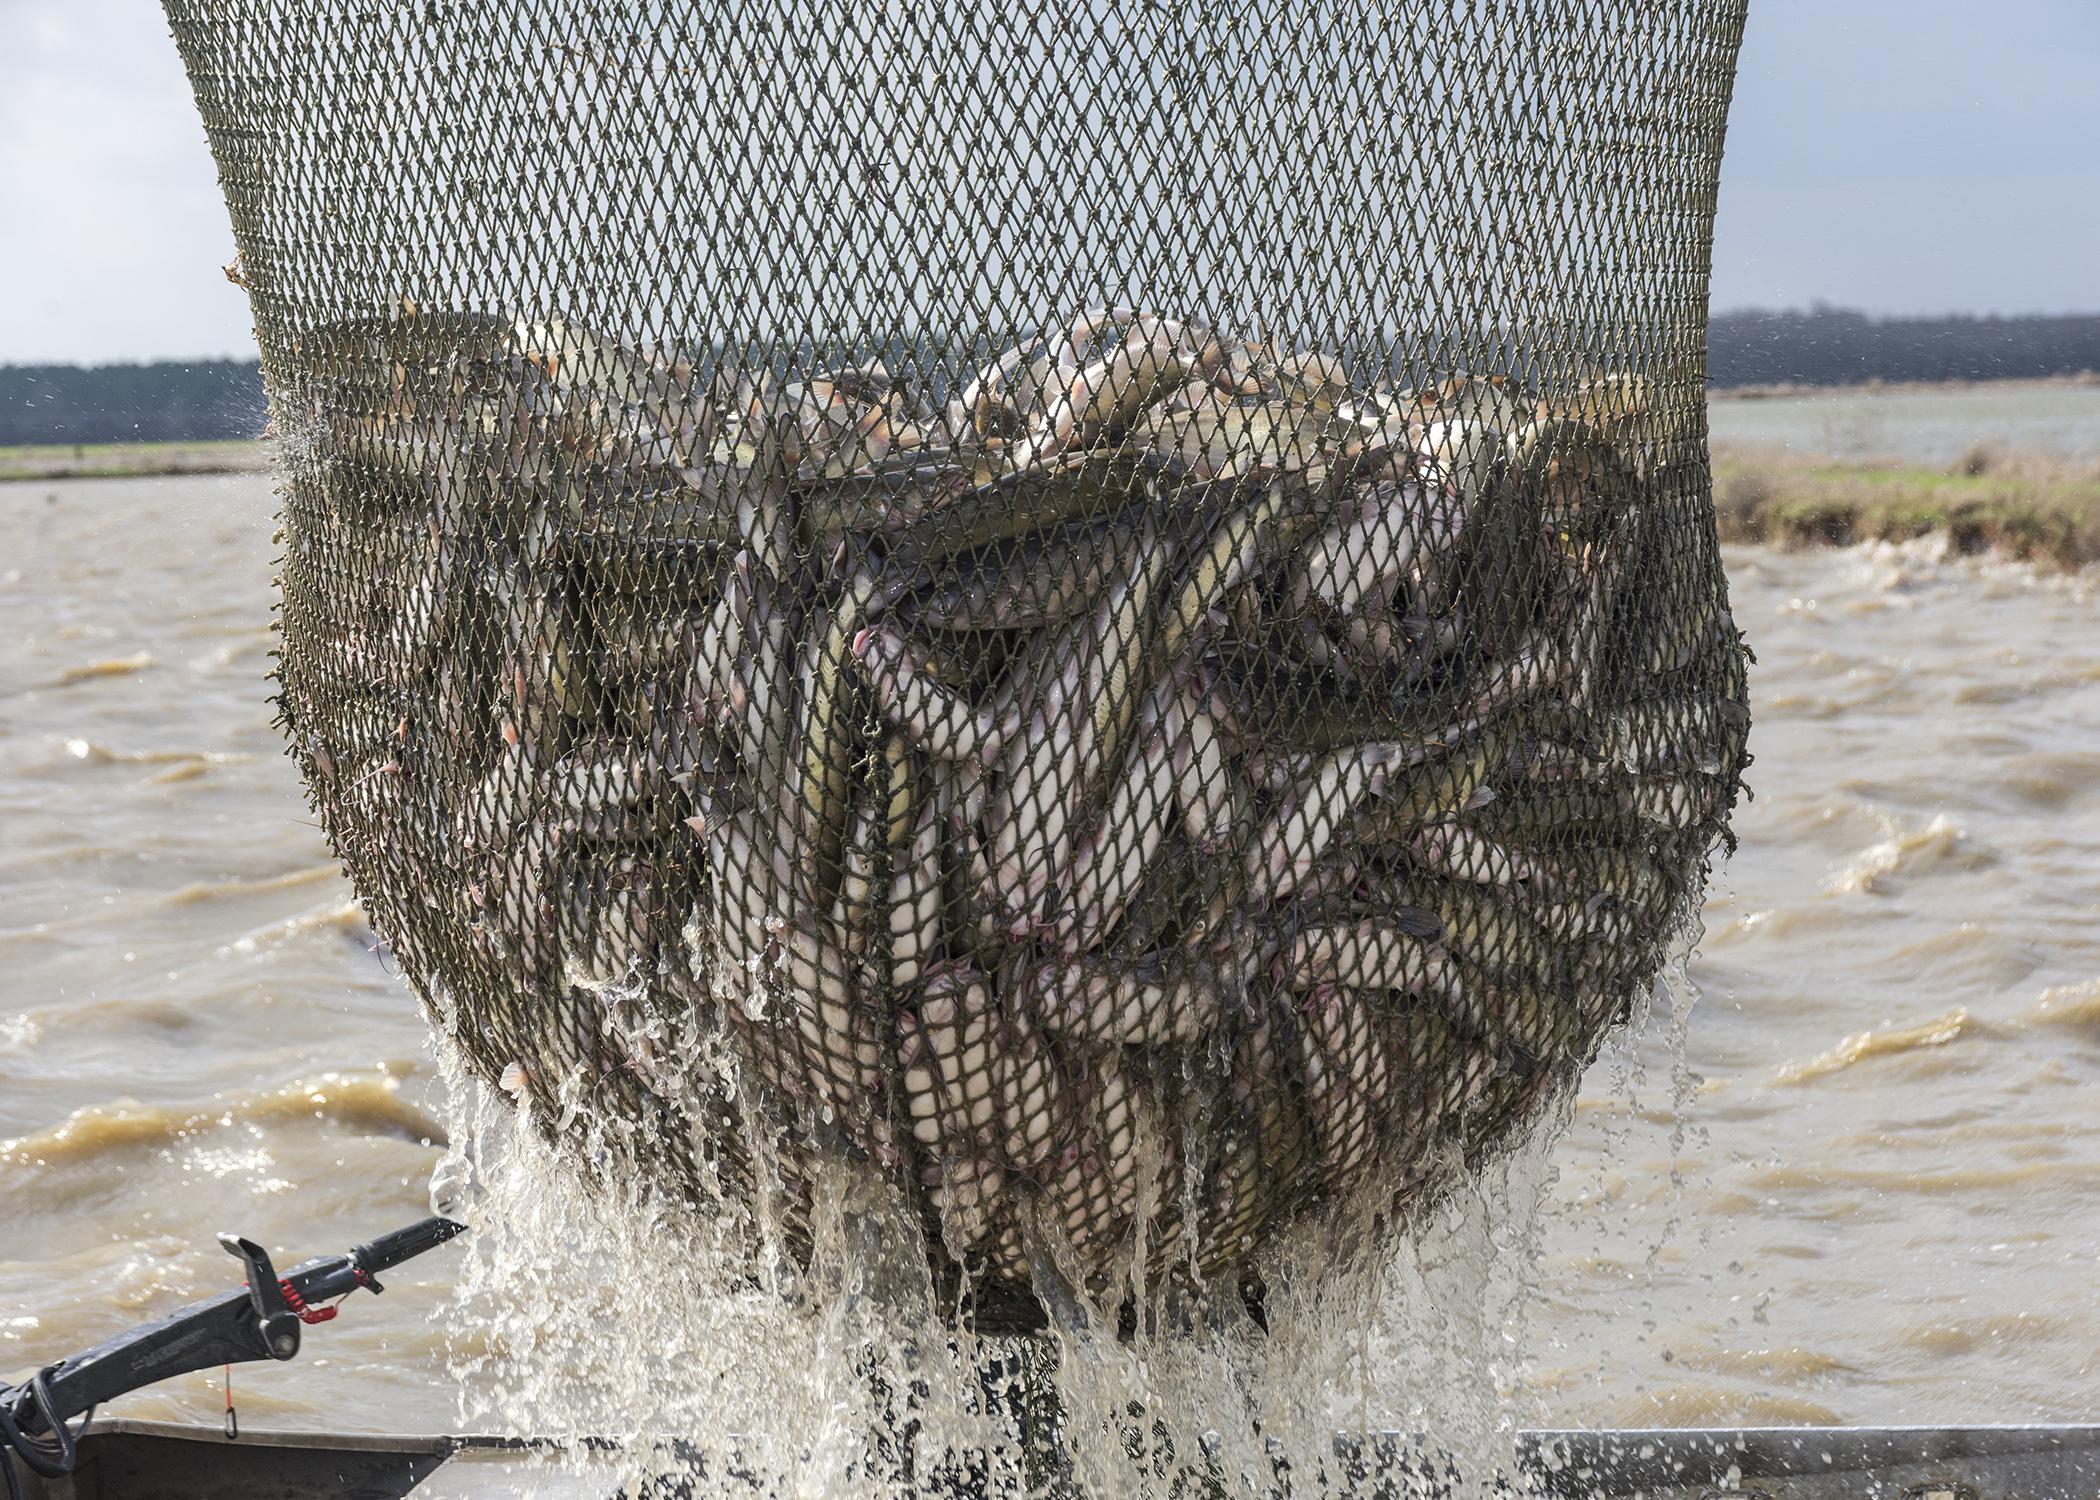 A batch of live catfish is caught in a net.